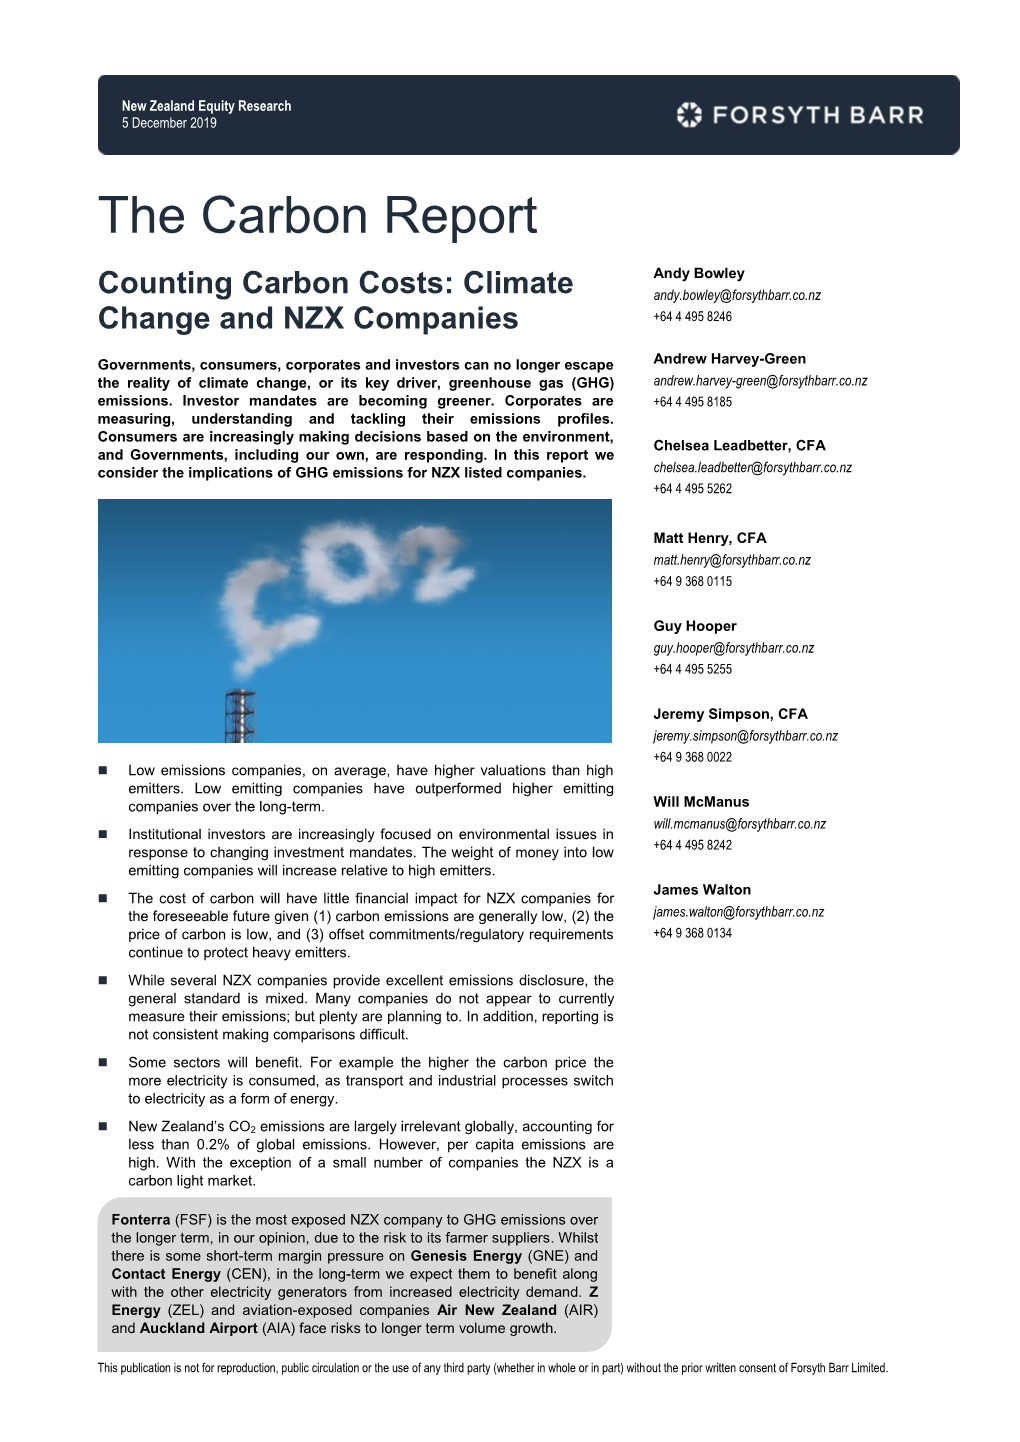 The Carbon Report